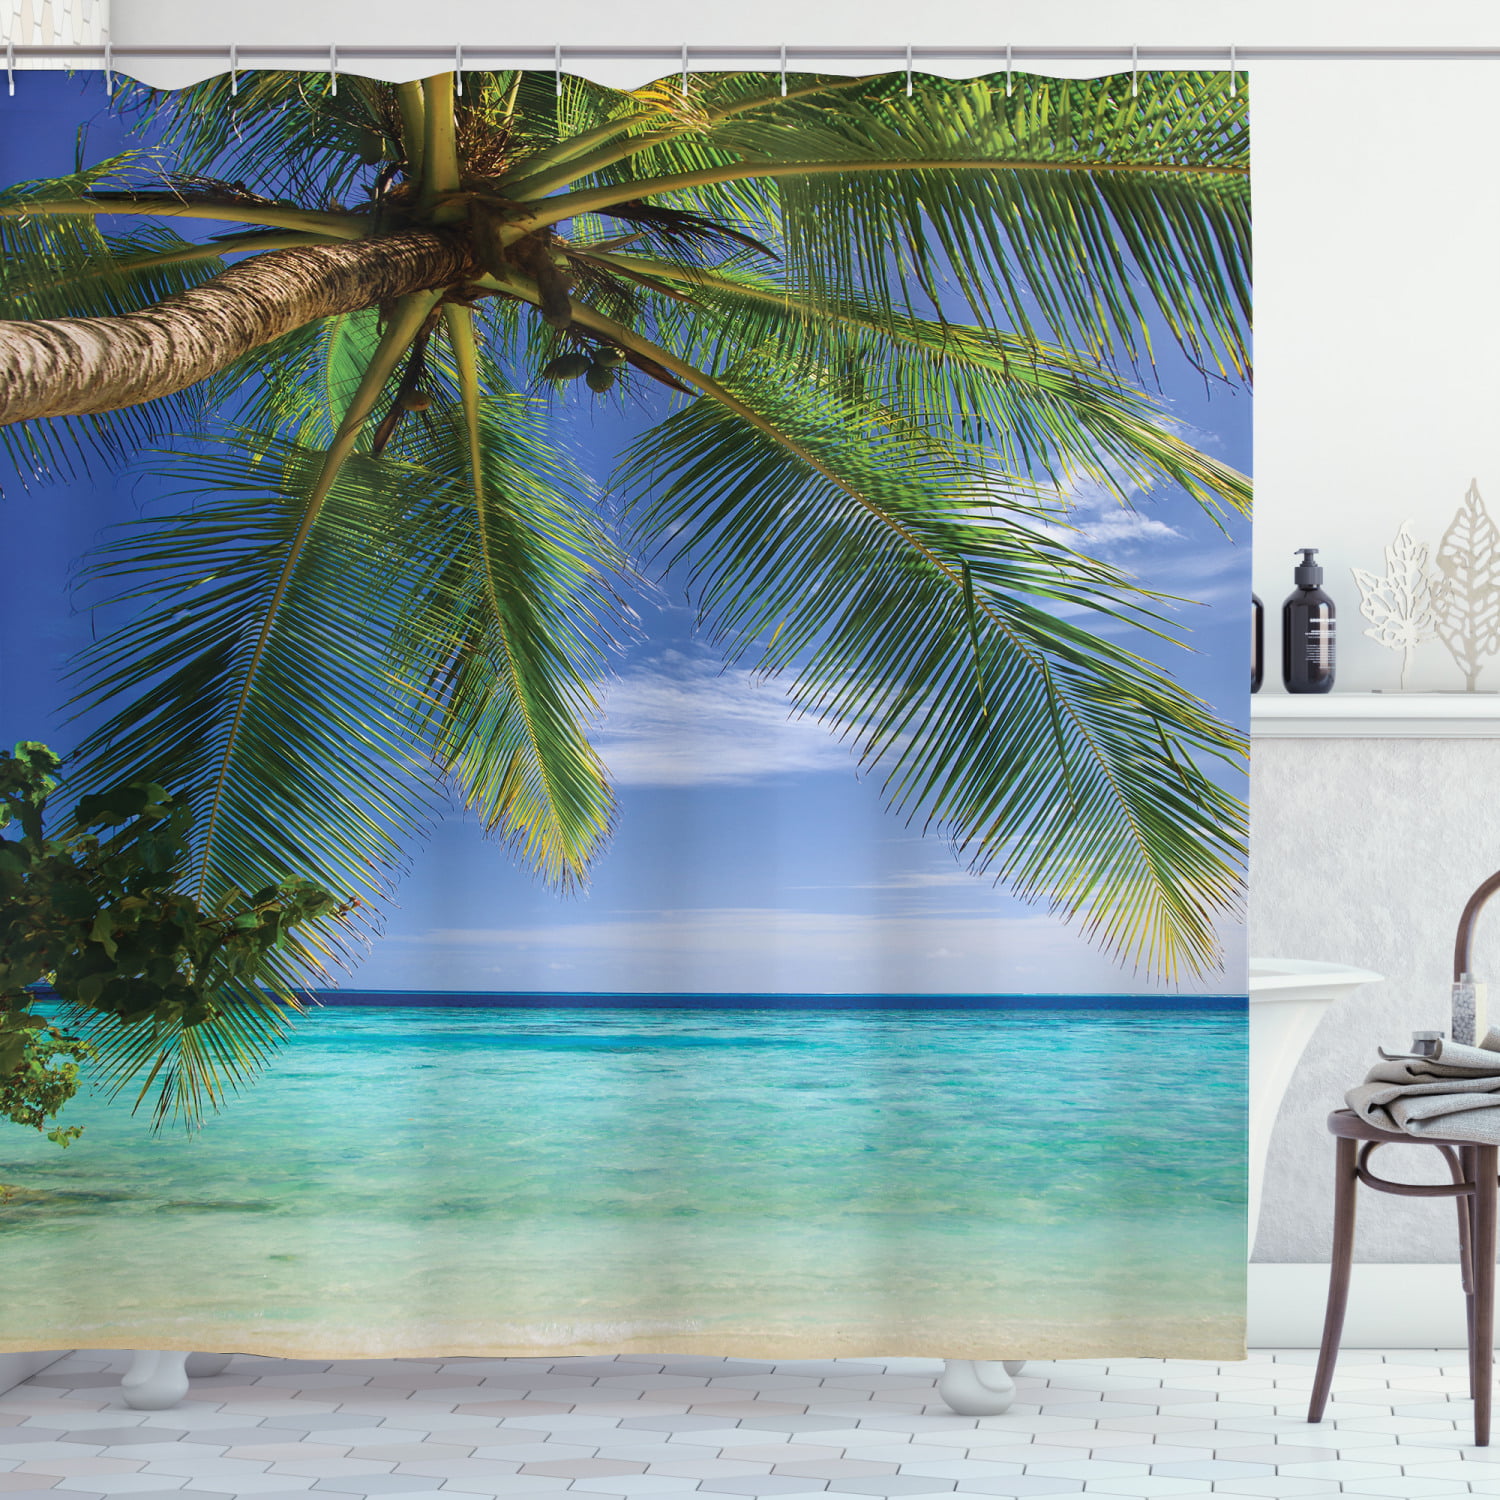 Ambesonne Ocean Decor Collection Polyester Fabric Bathroom Shower Curtain Set with Hooks Turquoise Green Image of a Sunny Day in a Tropical Island with Palm Trees and Ocean Heaven Calm Lands 